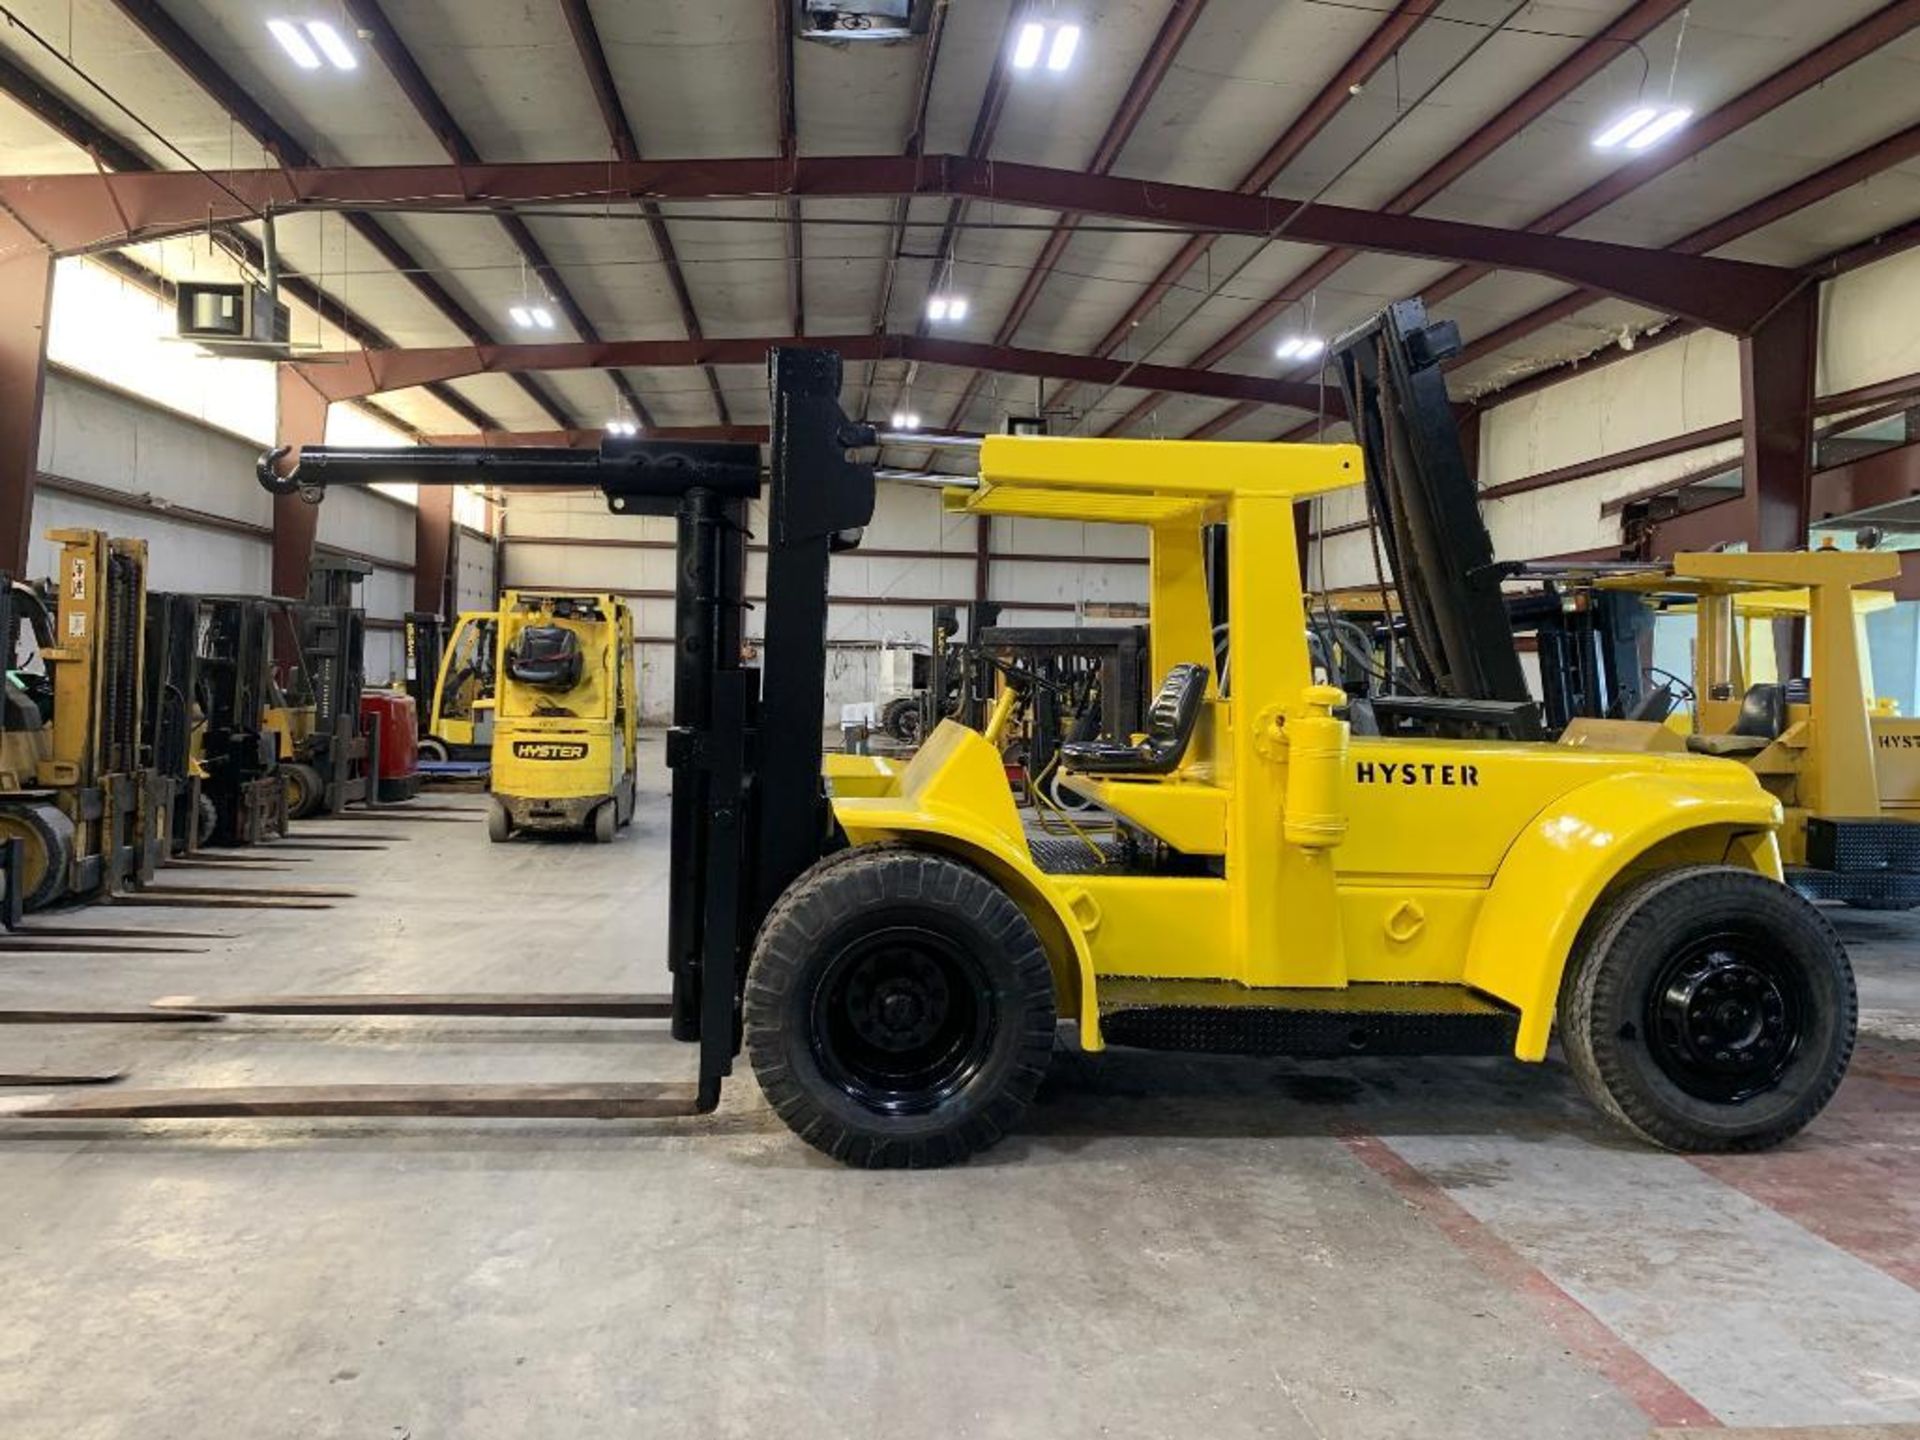 Hyster 22,500 lb. capacity forklift, model h225e, s/n n/a, gasoline, dual drive pneumatic tires, 2-s